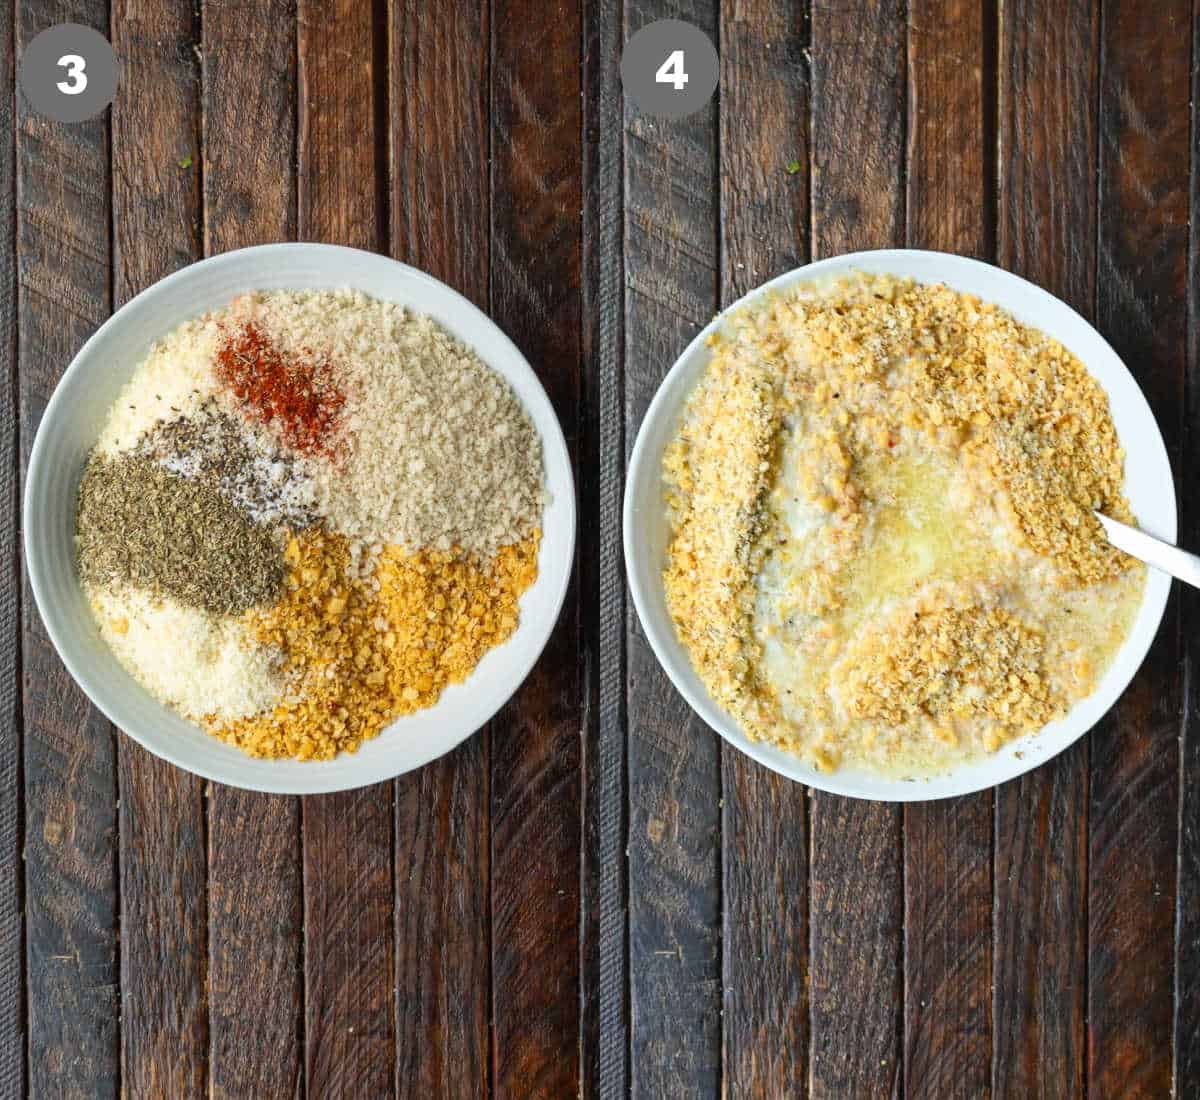 The breading ingredients placed in a bowl with the melted butter.